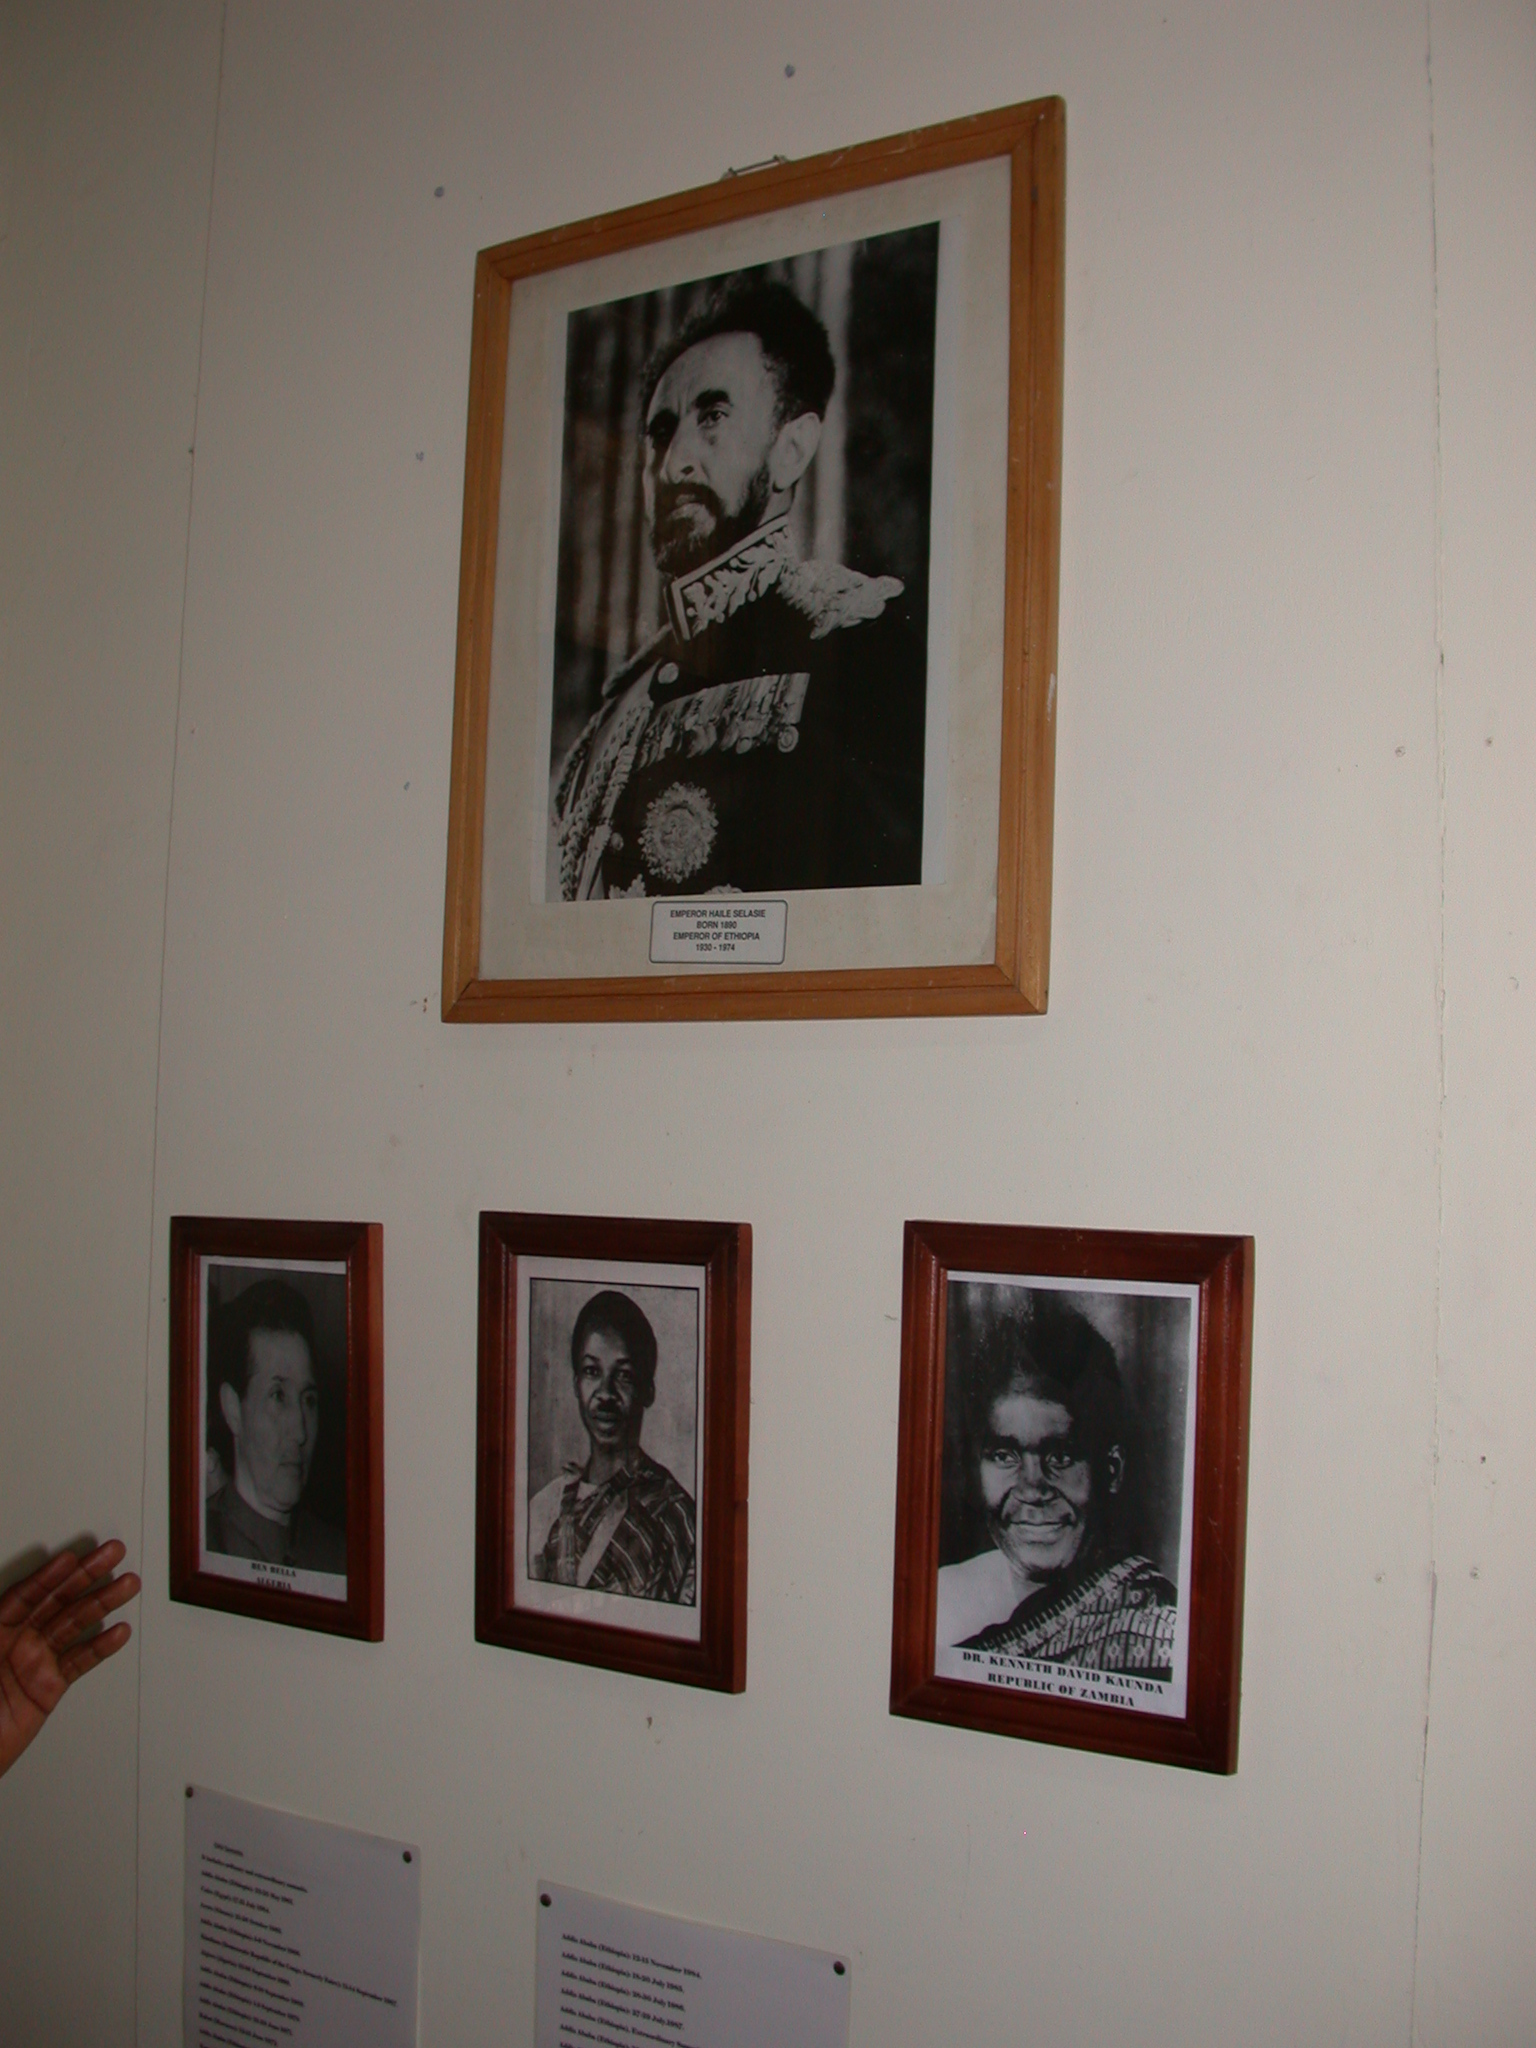 Photographs of African Freedom Fighters and Leaders, WEB DuBois Memorial Centre for Pan African Culture, Accra, Ghana